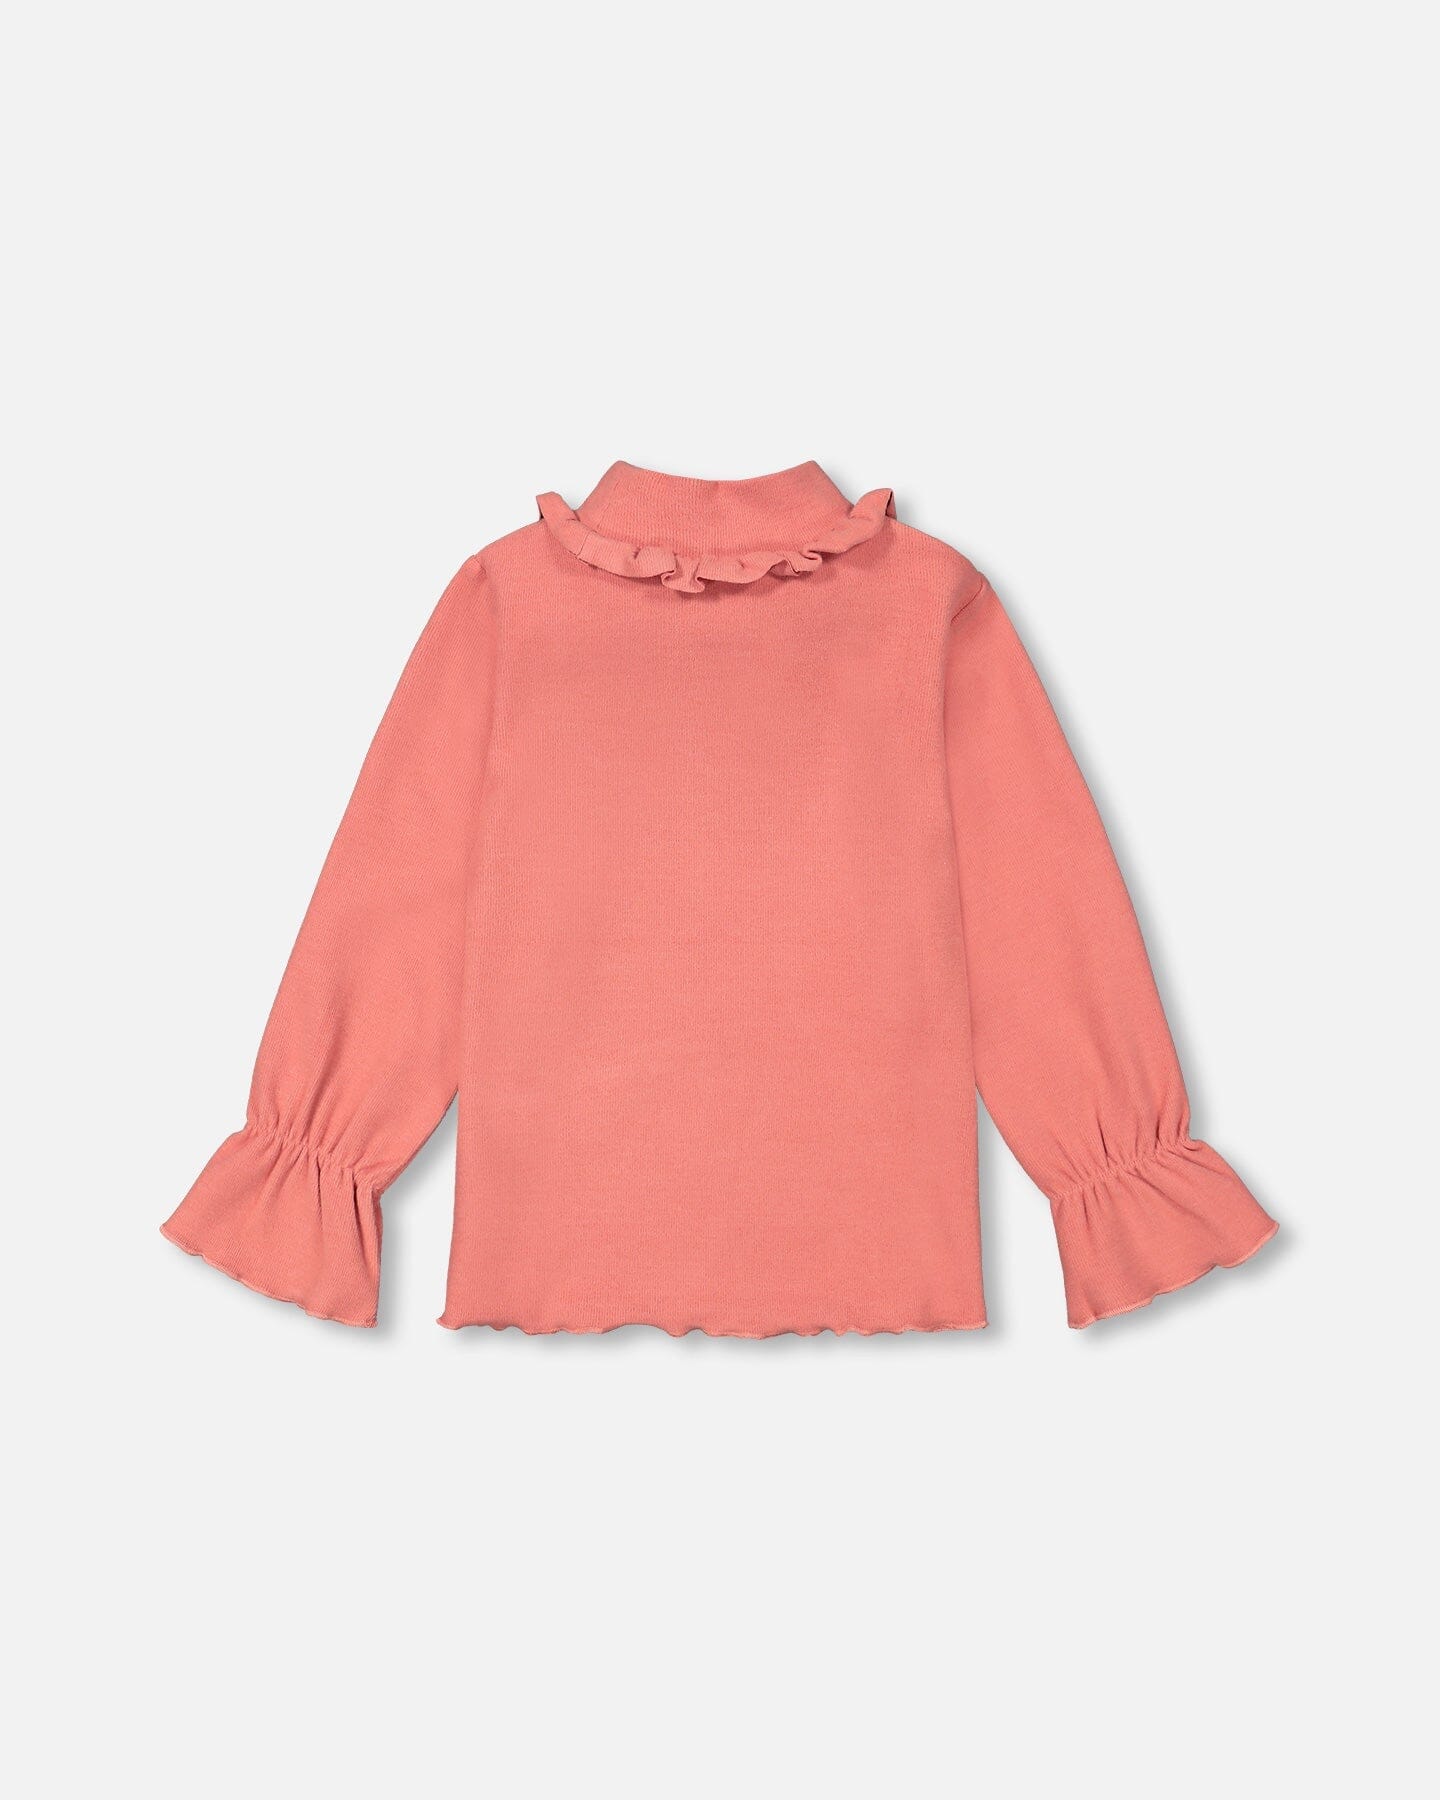 Super Soft Brushed Rib Mock Neck Top With Frills Salmon Pink - F20YG72_663